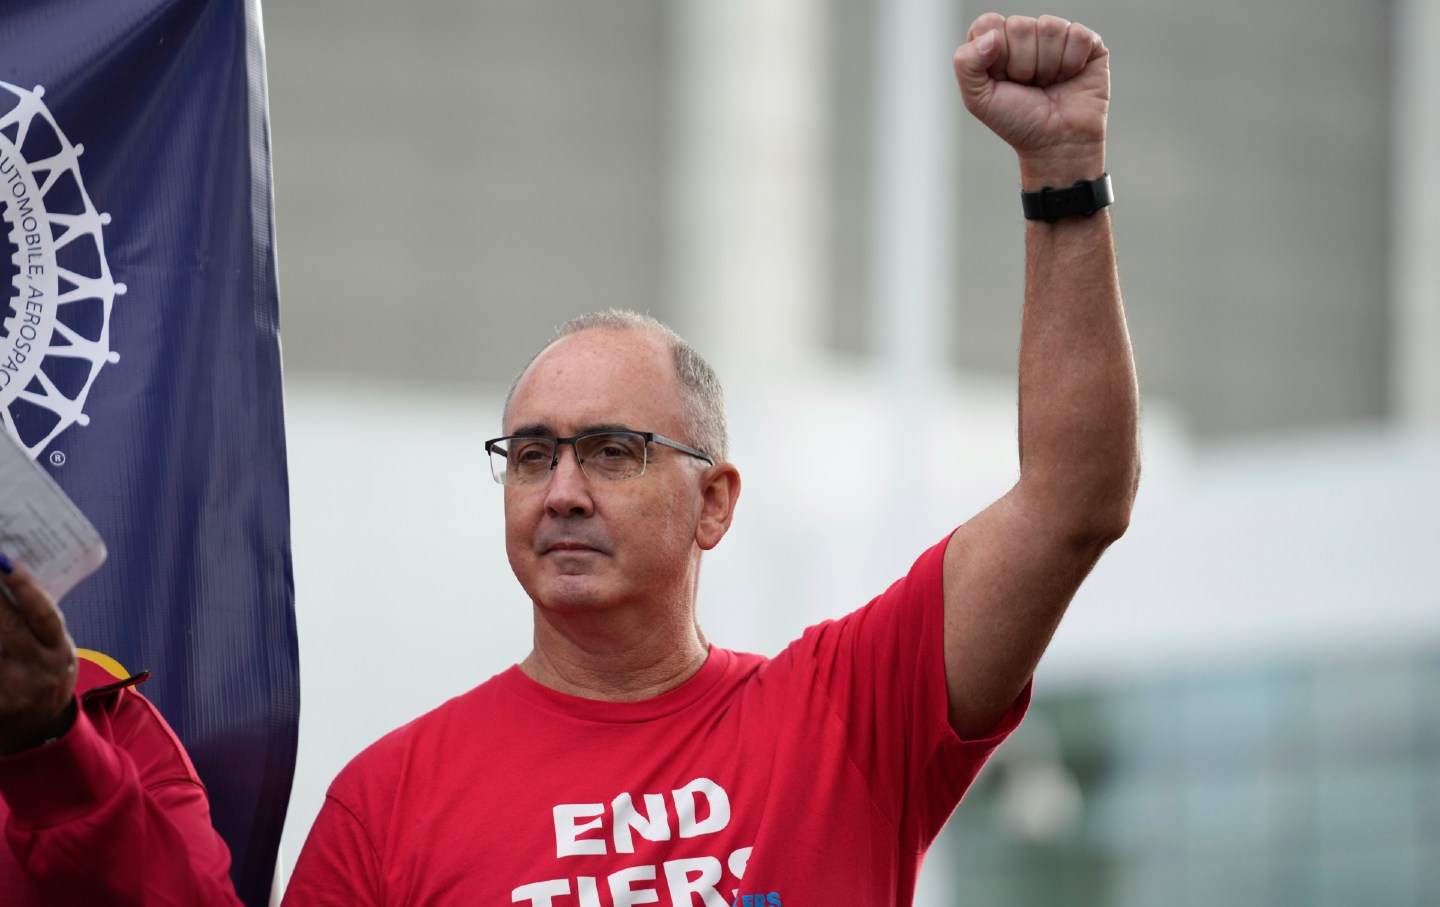 United Auto Workers President Shawn Fain raises his fist at a rally in Detroit on September 15, 2023.